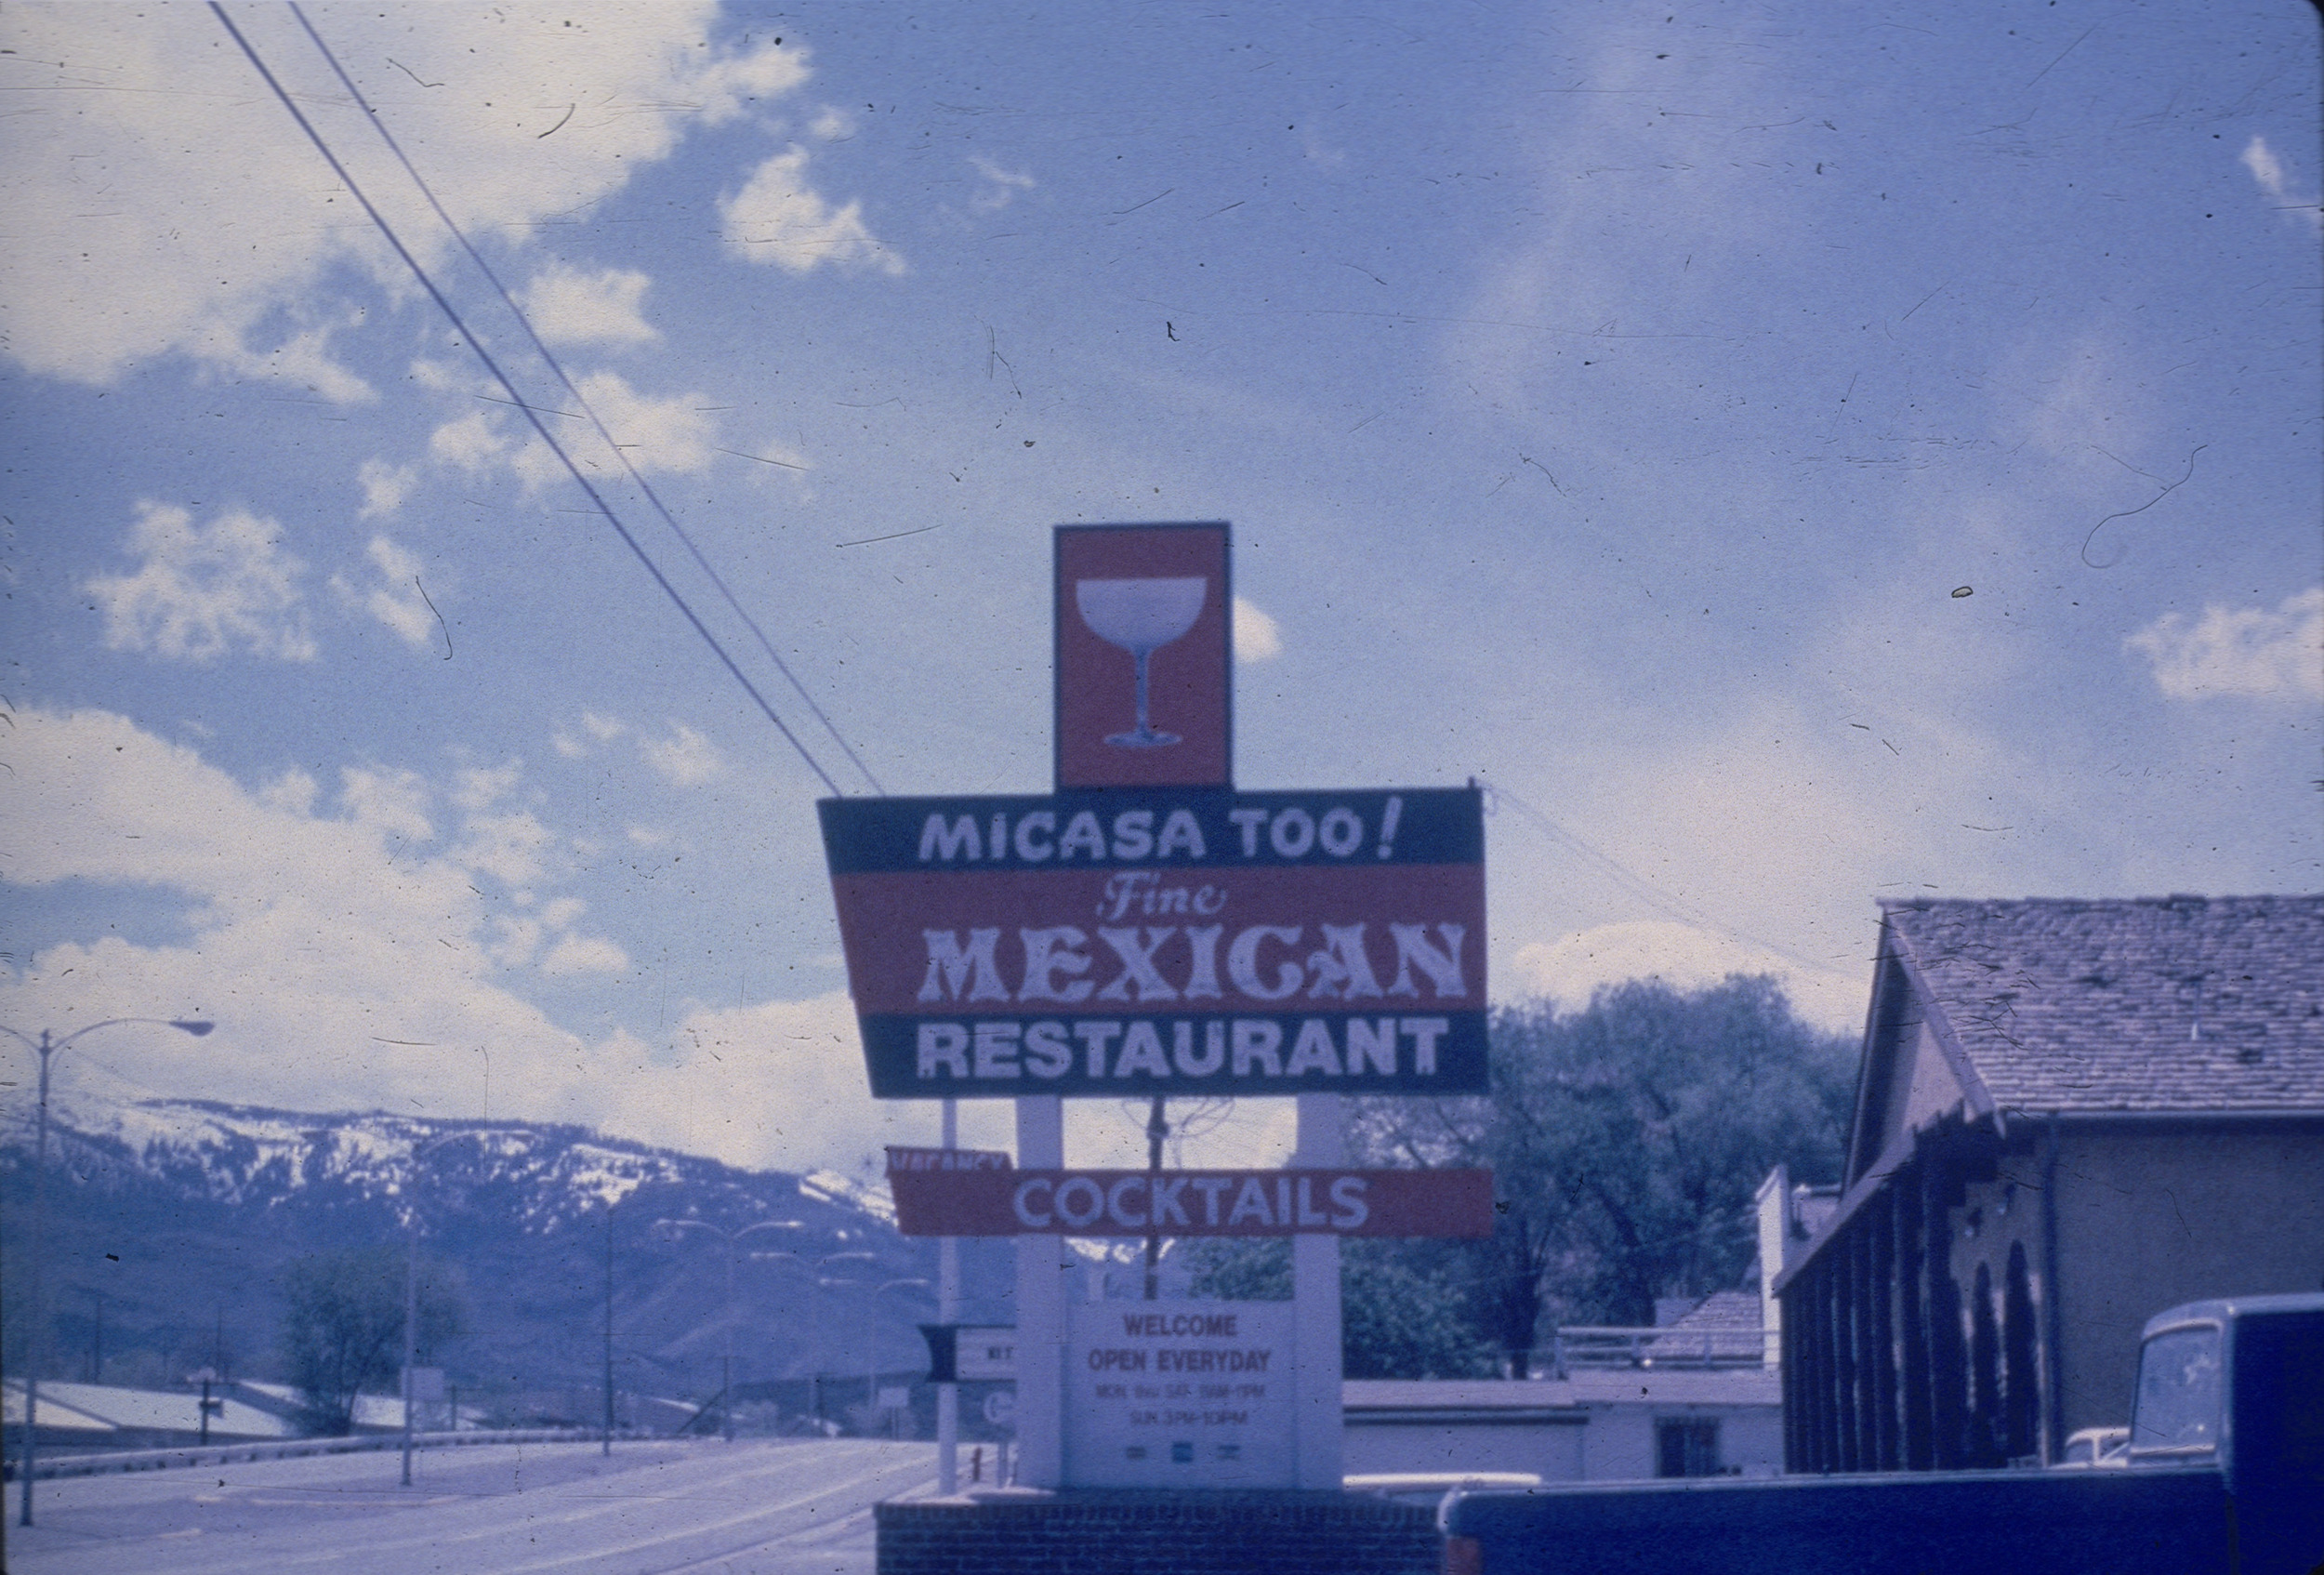 Slide of the Mi Casa Too restaurant and its neon signs, Reno, Nevada, 1986